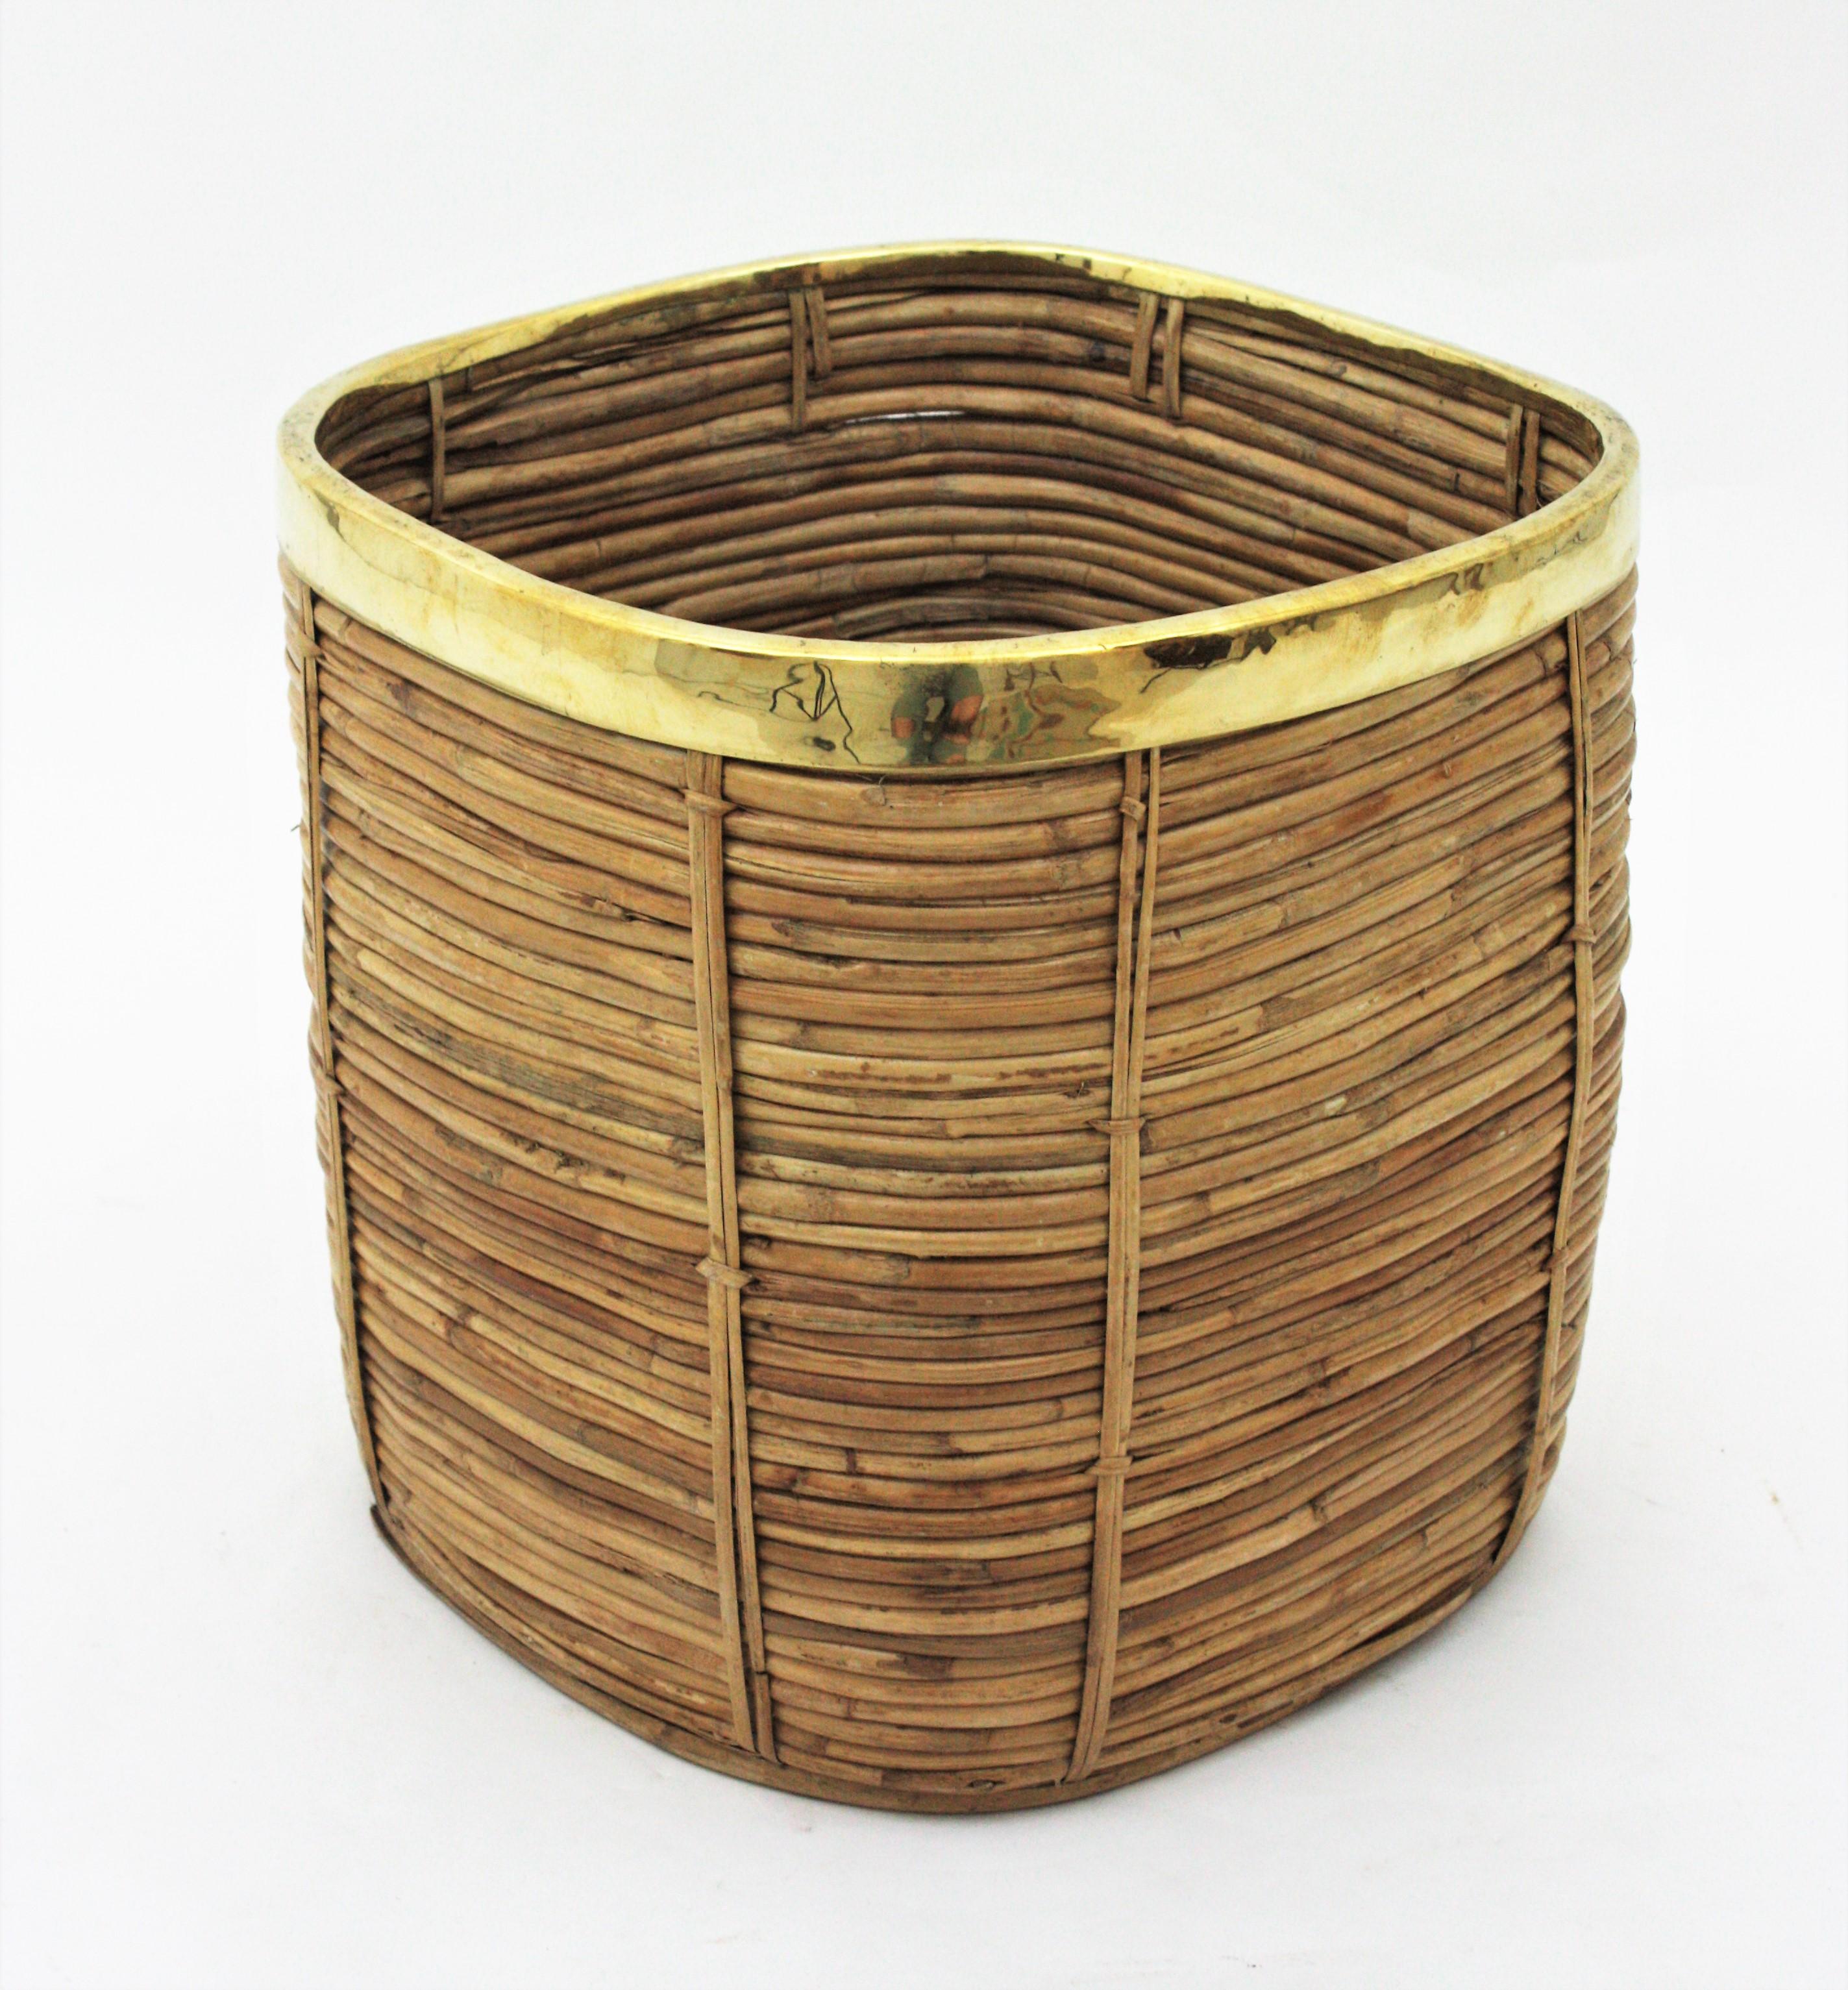 Large Italian Rattan and Brass Crespi Style Square Basket Planter, 1970s For Sale 1